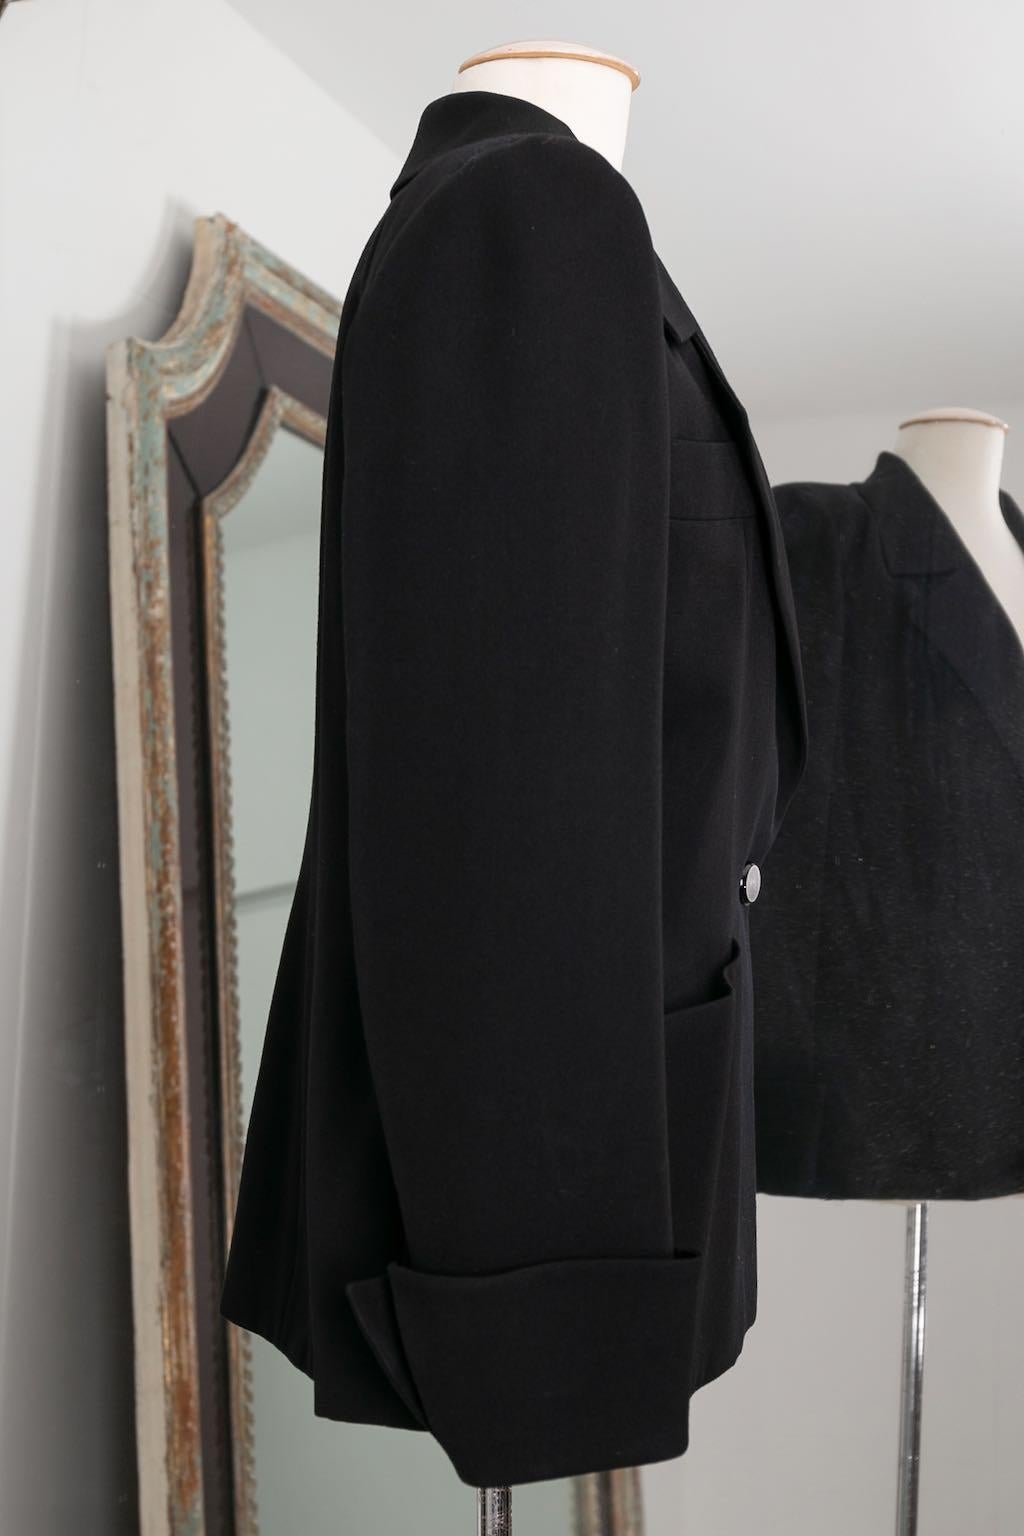 Yves Saint Laurent Haute Couture Black Skirt and Jacket Set, circa 1981/1982 For Sale 12